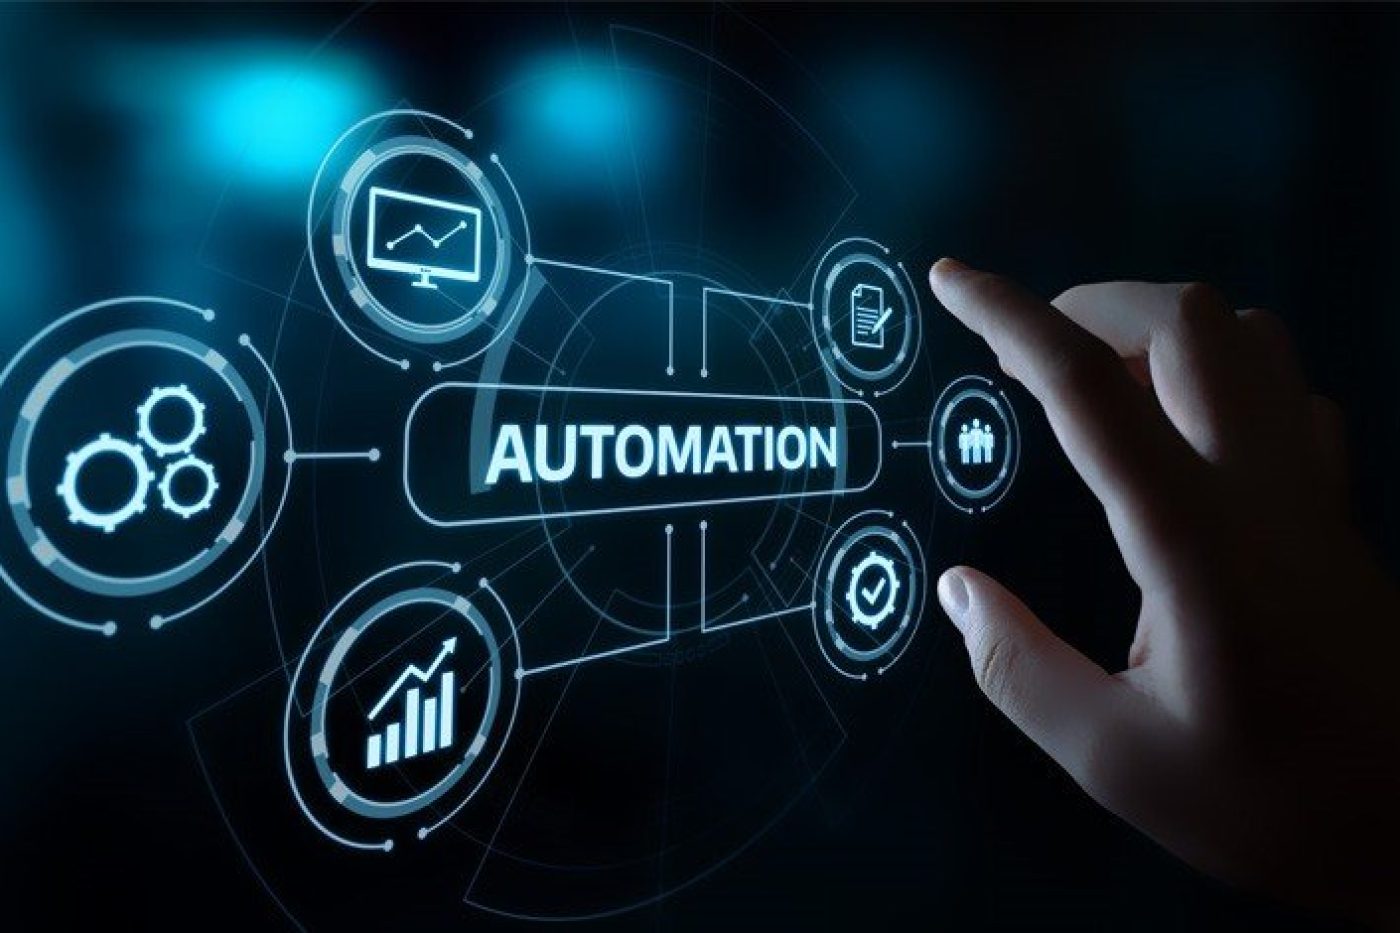 Automation Software